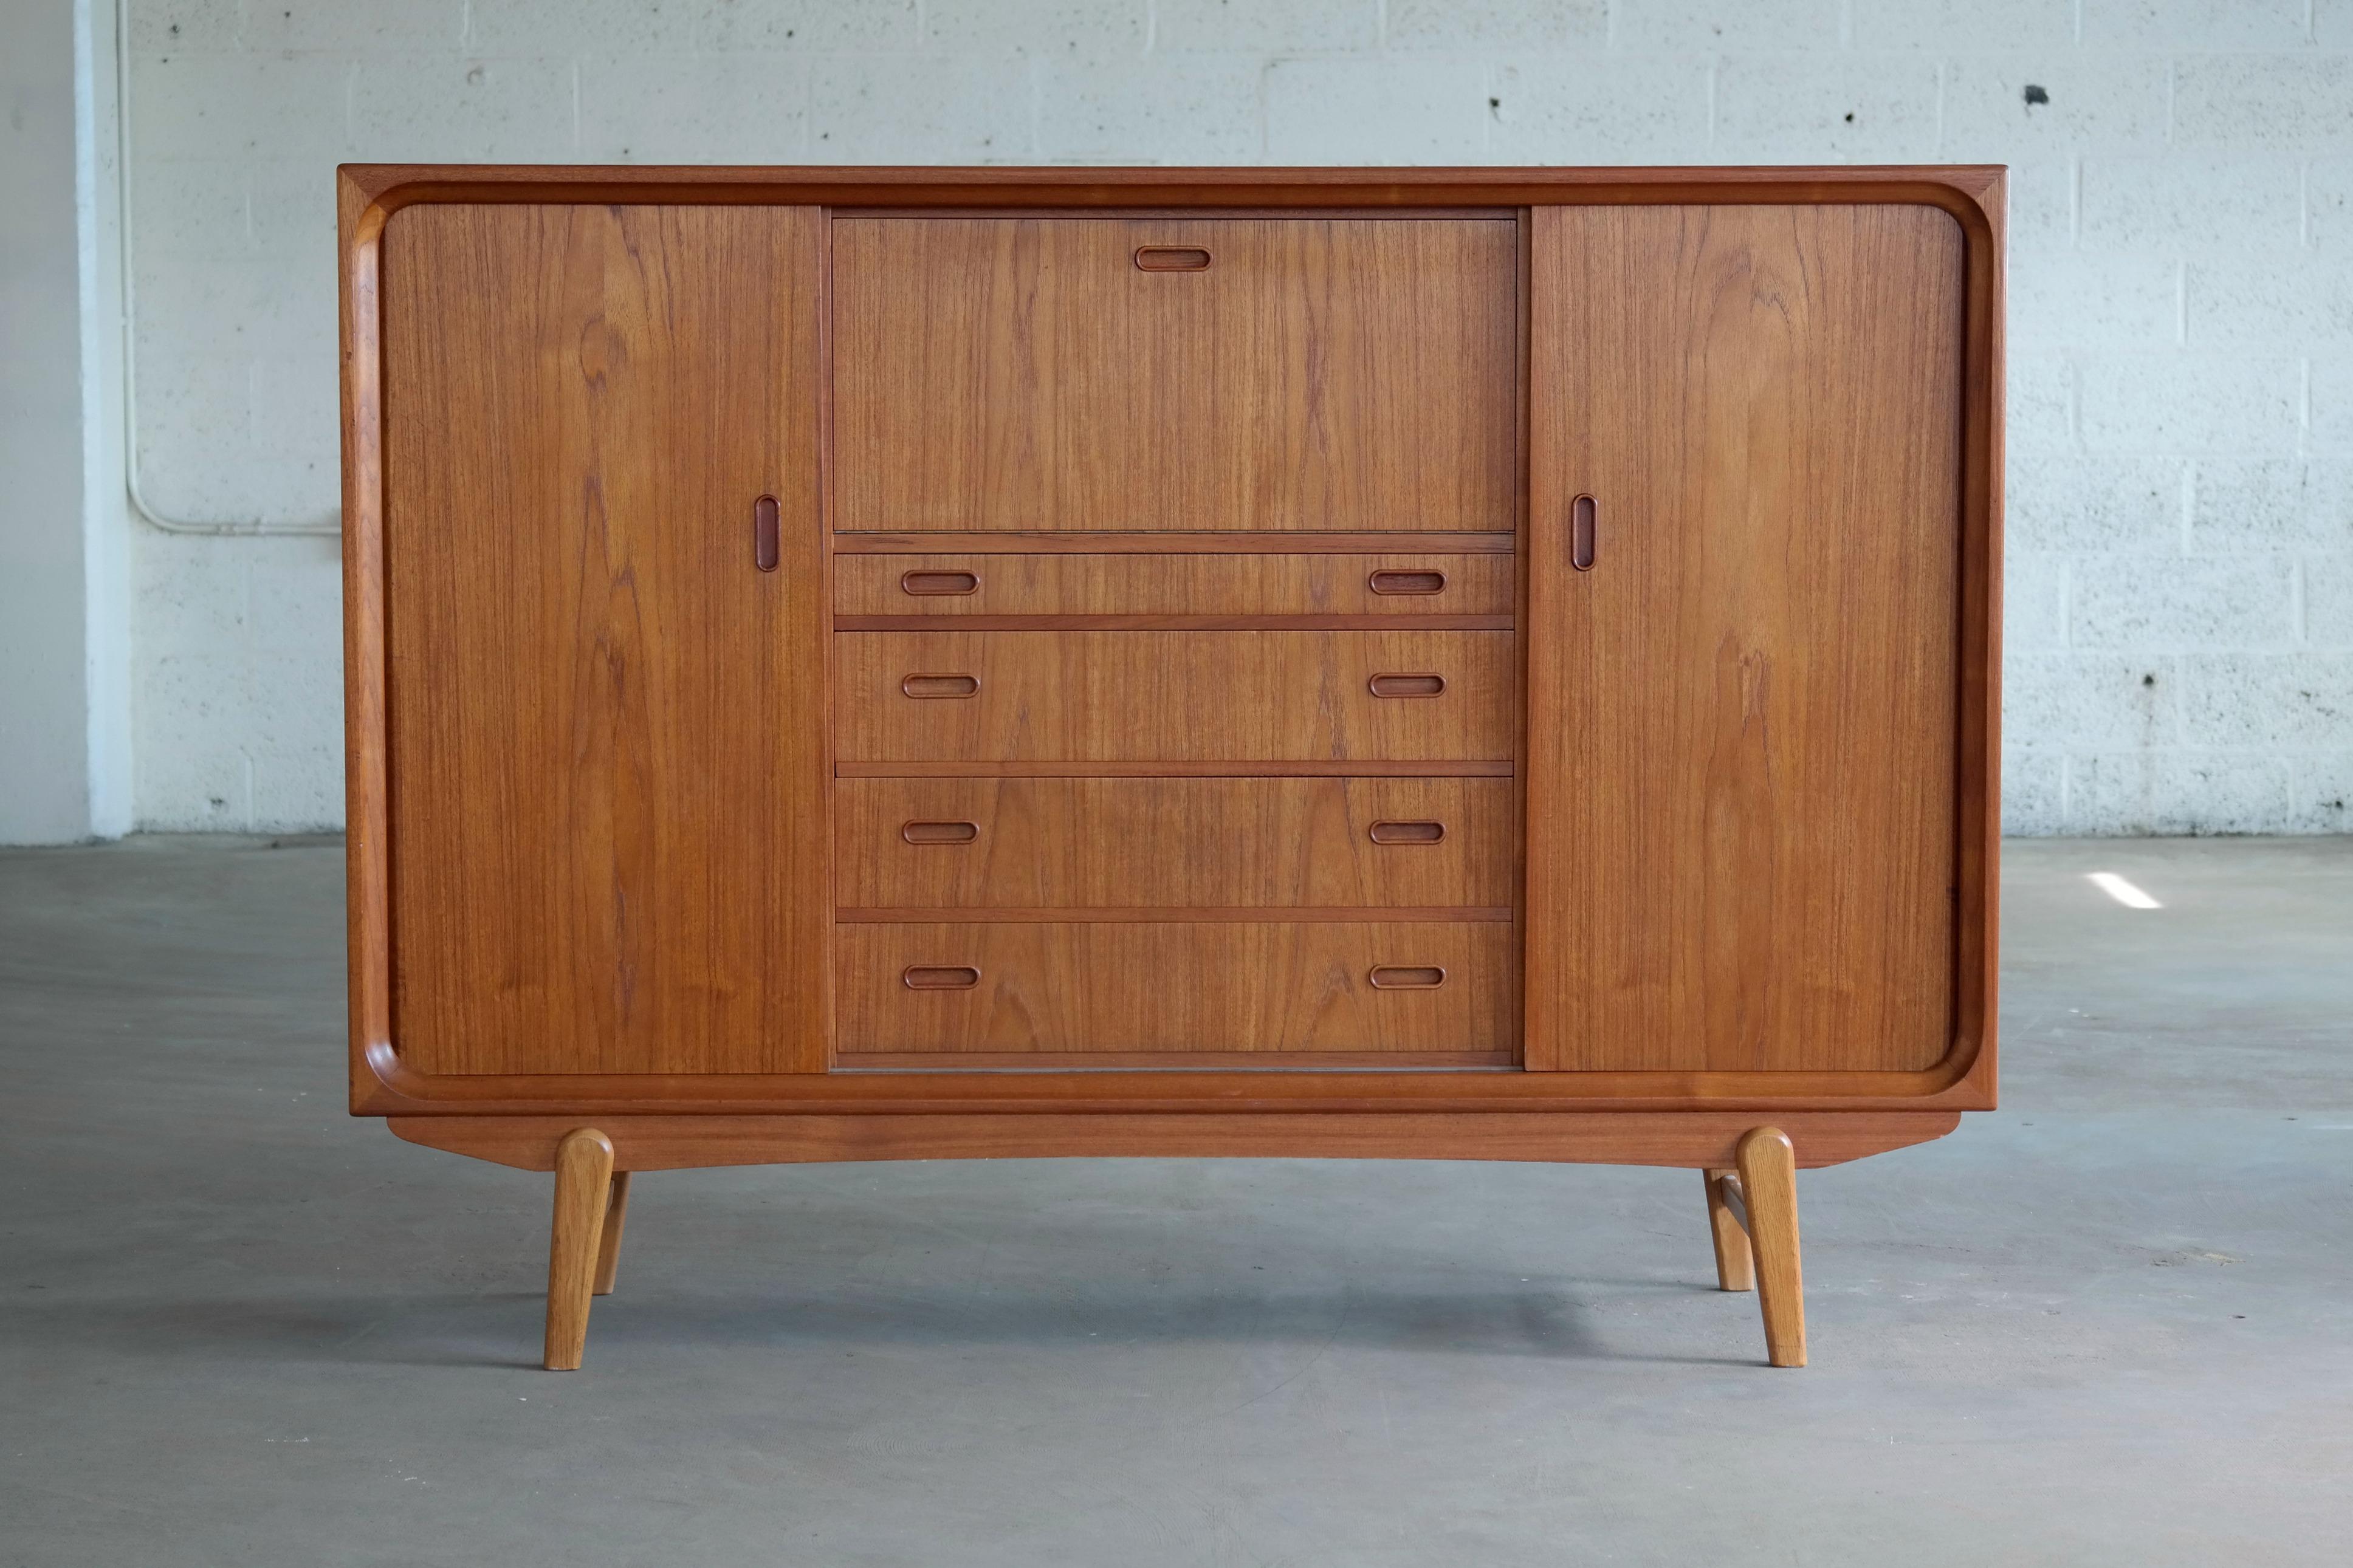 Fantastic Danish highboard attributed to HP Hansen and built sometime in the 1960. Elegant timeless design piece with a nice size and presence about it without being imposing. The build quality is of the highest caliber with all veneers are solid